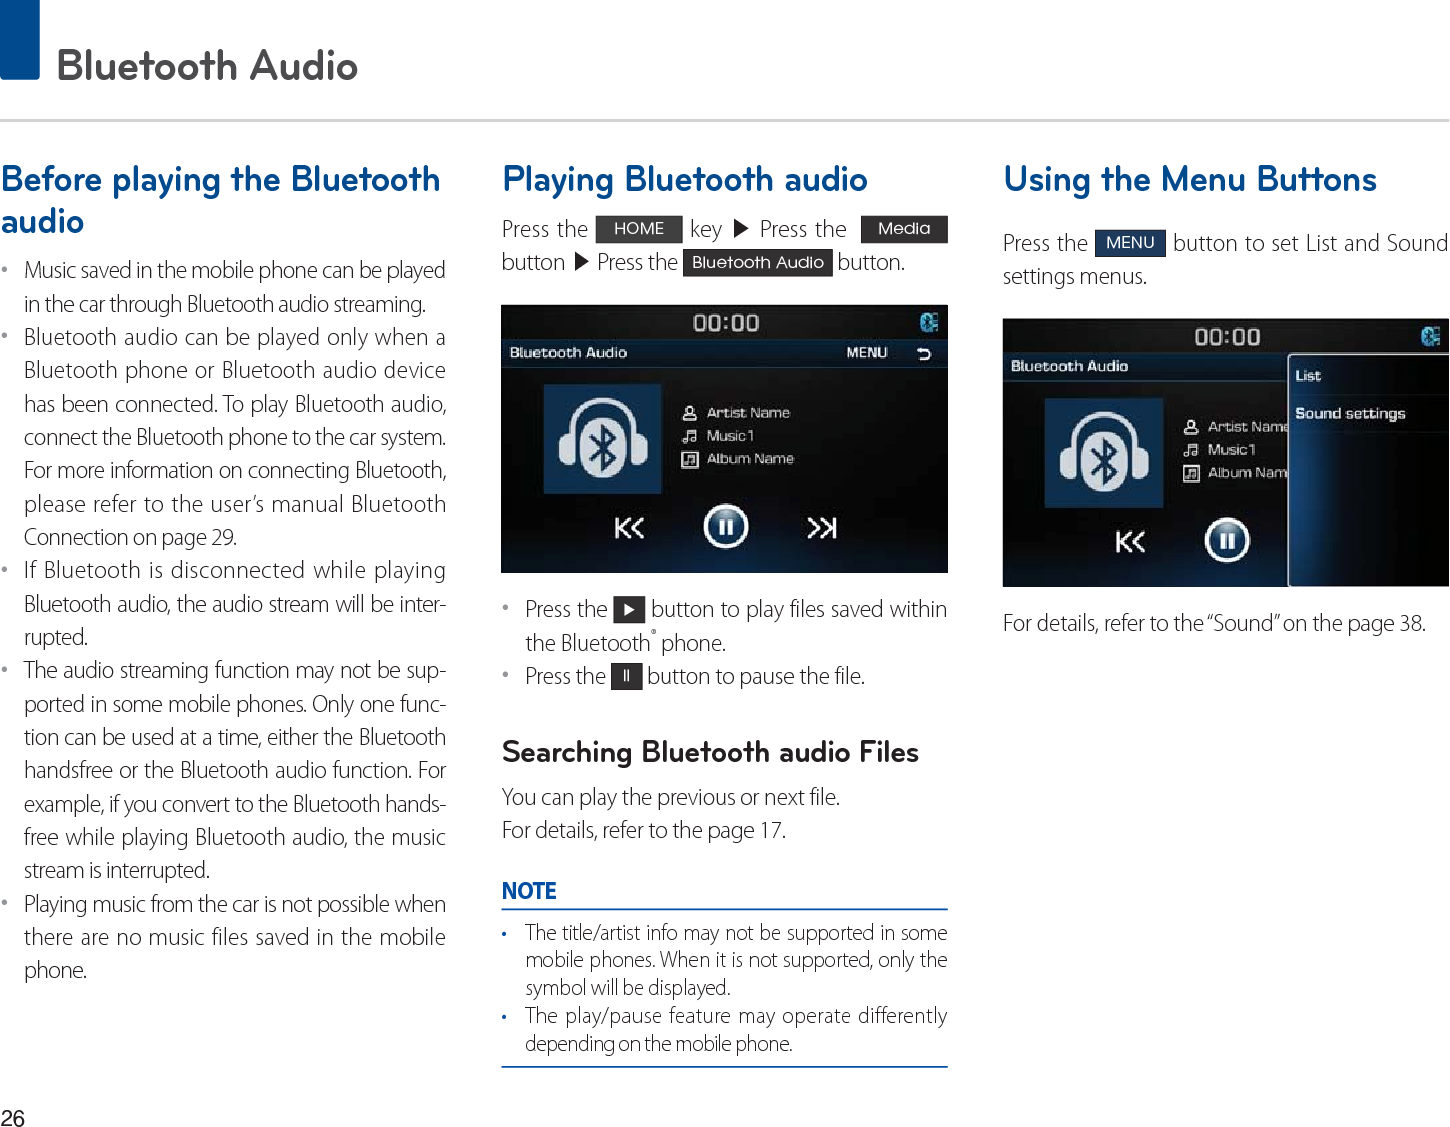  Bluetooth AudioBefore playing the Bluetooth audioˍMusic saved in the mobile phone can be played in the car through Bluetooth audio streaming. ˍBluetooth audio can be played only when a Bluetooth phone or Bluetooth audio device has been connected. To play Bluetooth audio, connect the Bluetooth phone to the car system. For more information on connecting Bluetooth, please refer to the user’s manual Bluetooth Connection on page 29.ˍIf Bluetooth is disconnected while playing Bluetooth audio, the audio stream will be inter-rupted. ˍThe audio streaming function may not be sup-ported in some mobile phones. Only one func-tion can be used at a time, either the Bluetooth handsfree or the Bluetooth audio function. For example, if you convert to the Bluetooth hands-free while playing Bluetooth audio, the music stream is interrupted. ˍPlaying music from the car is not possible when there are no music files saved in the mobile phone. Playing Bluetooth audioPress the +20( key ▶ Press the  0HGLD  button ▶ Press the %OXHWRRWK$XGLR button.ˍPress the Ԣ button to play files saved within the Bluetooth® phone.ˍPress the OO button to pause the file.Searching Bluetooth audio FilesYou can play the previous or next file. For details, refer to the page 17.NOTEr The title/artist info may not be supported in some mobile phones. When it is not supported, only the symbol will be displayed.r The play/pause feature may operate differently depending on the mobile phone.Using the Menu ButtonsPress the 0(18 button to set List and Sound settings menus.For details, refer to the “Sound” on the page 38.